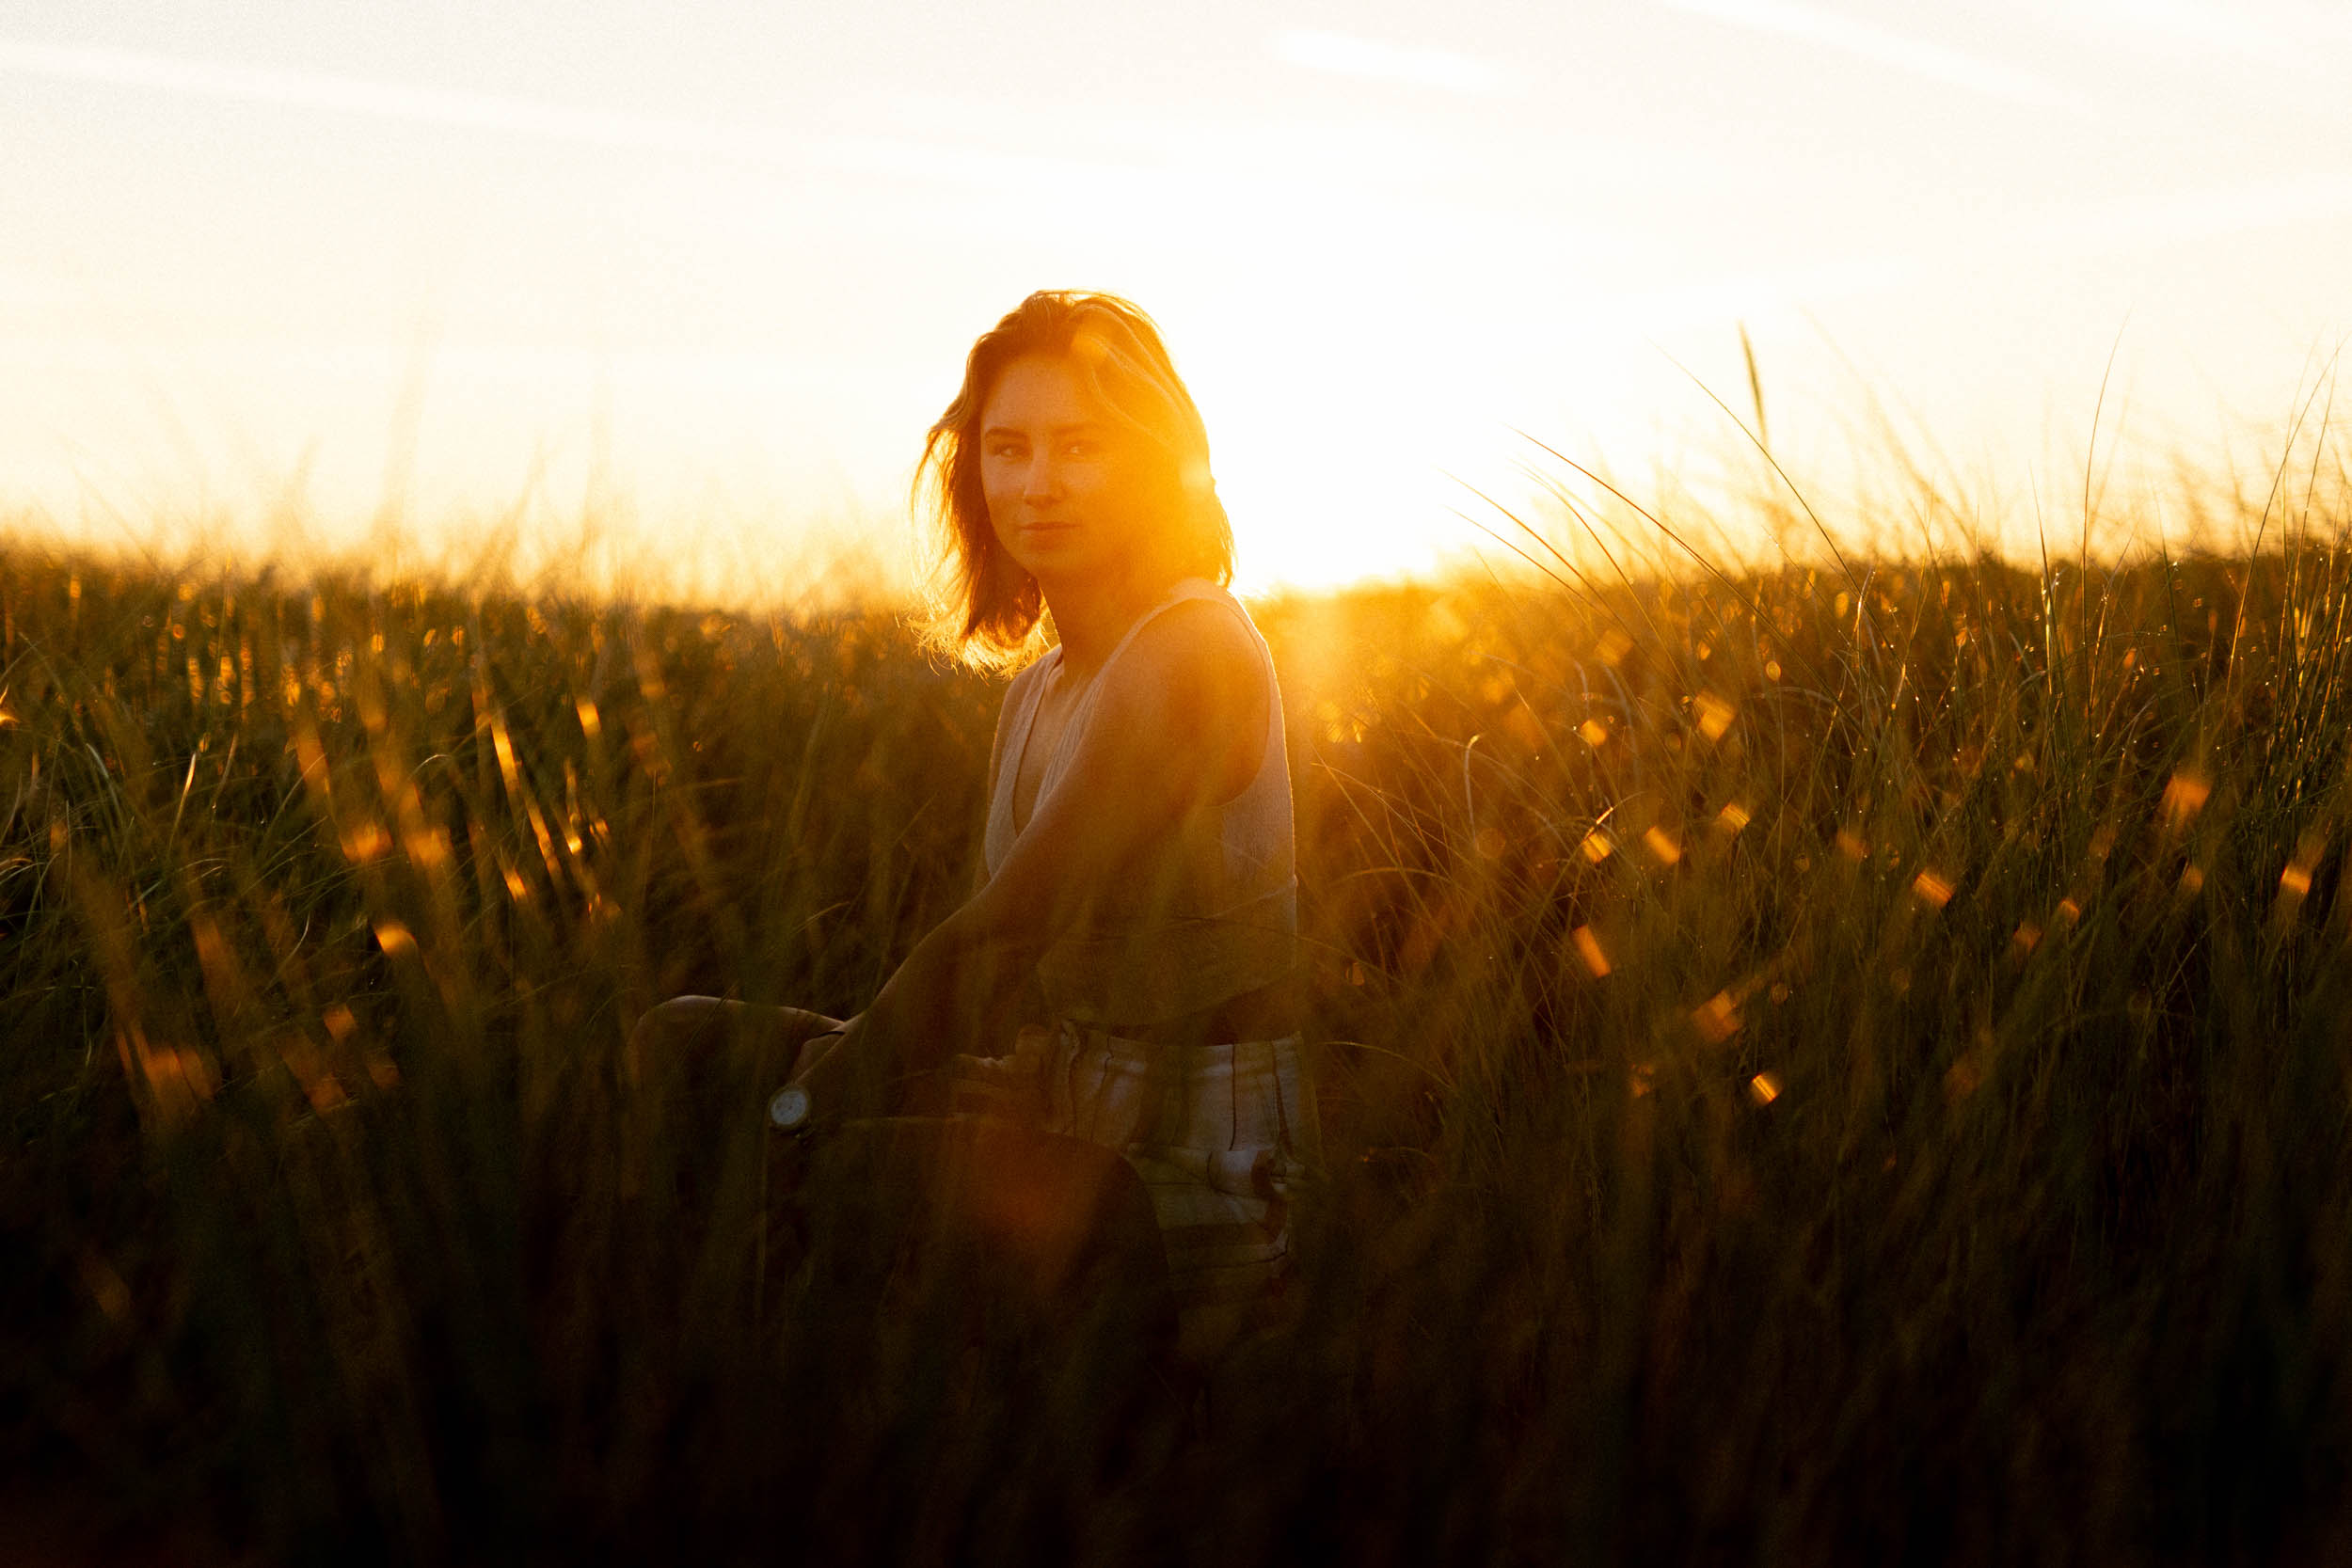 A woman standing in a field, captured in a beautiful sunset photo.